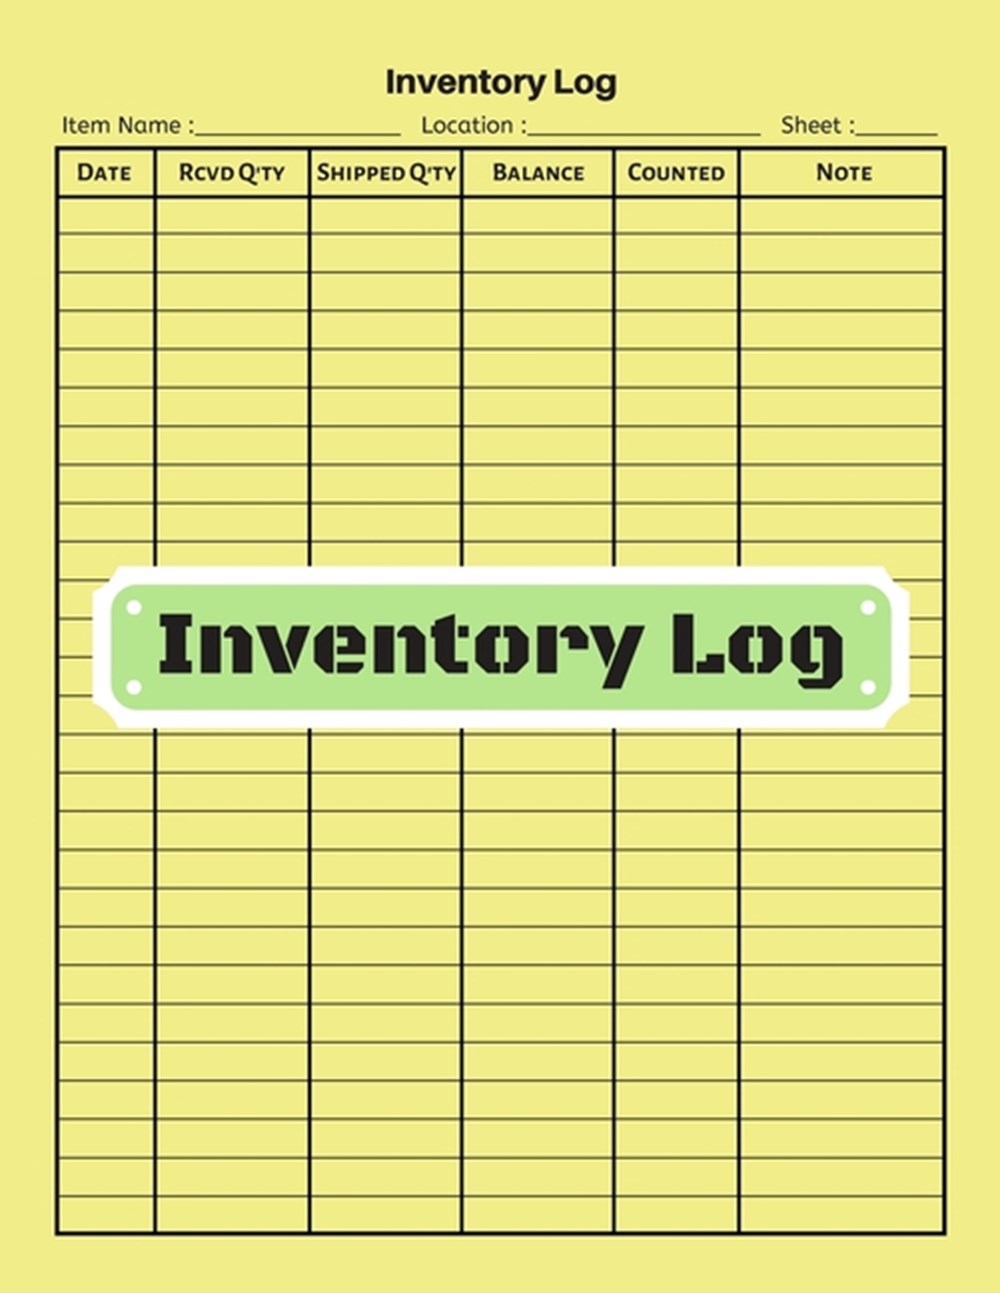 Inventory log V.9 - Inventory Tracking Book, Inventory Management and Control, Small Business Bookke